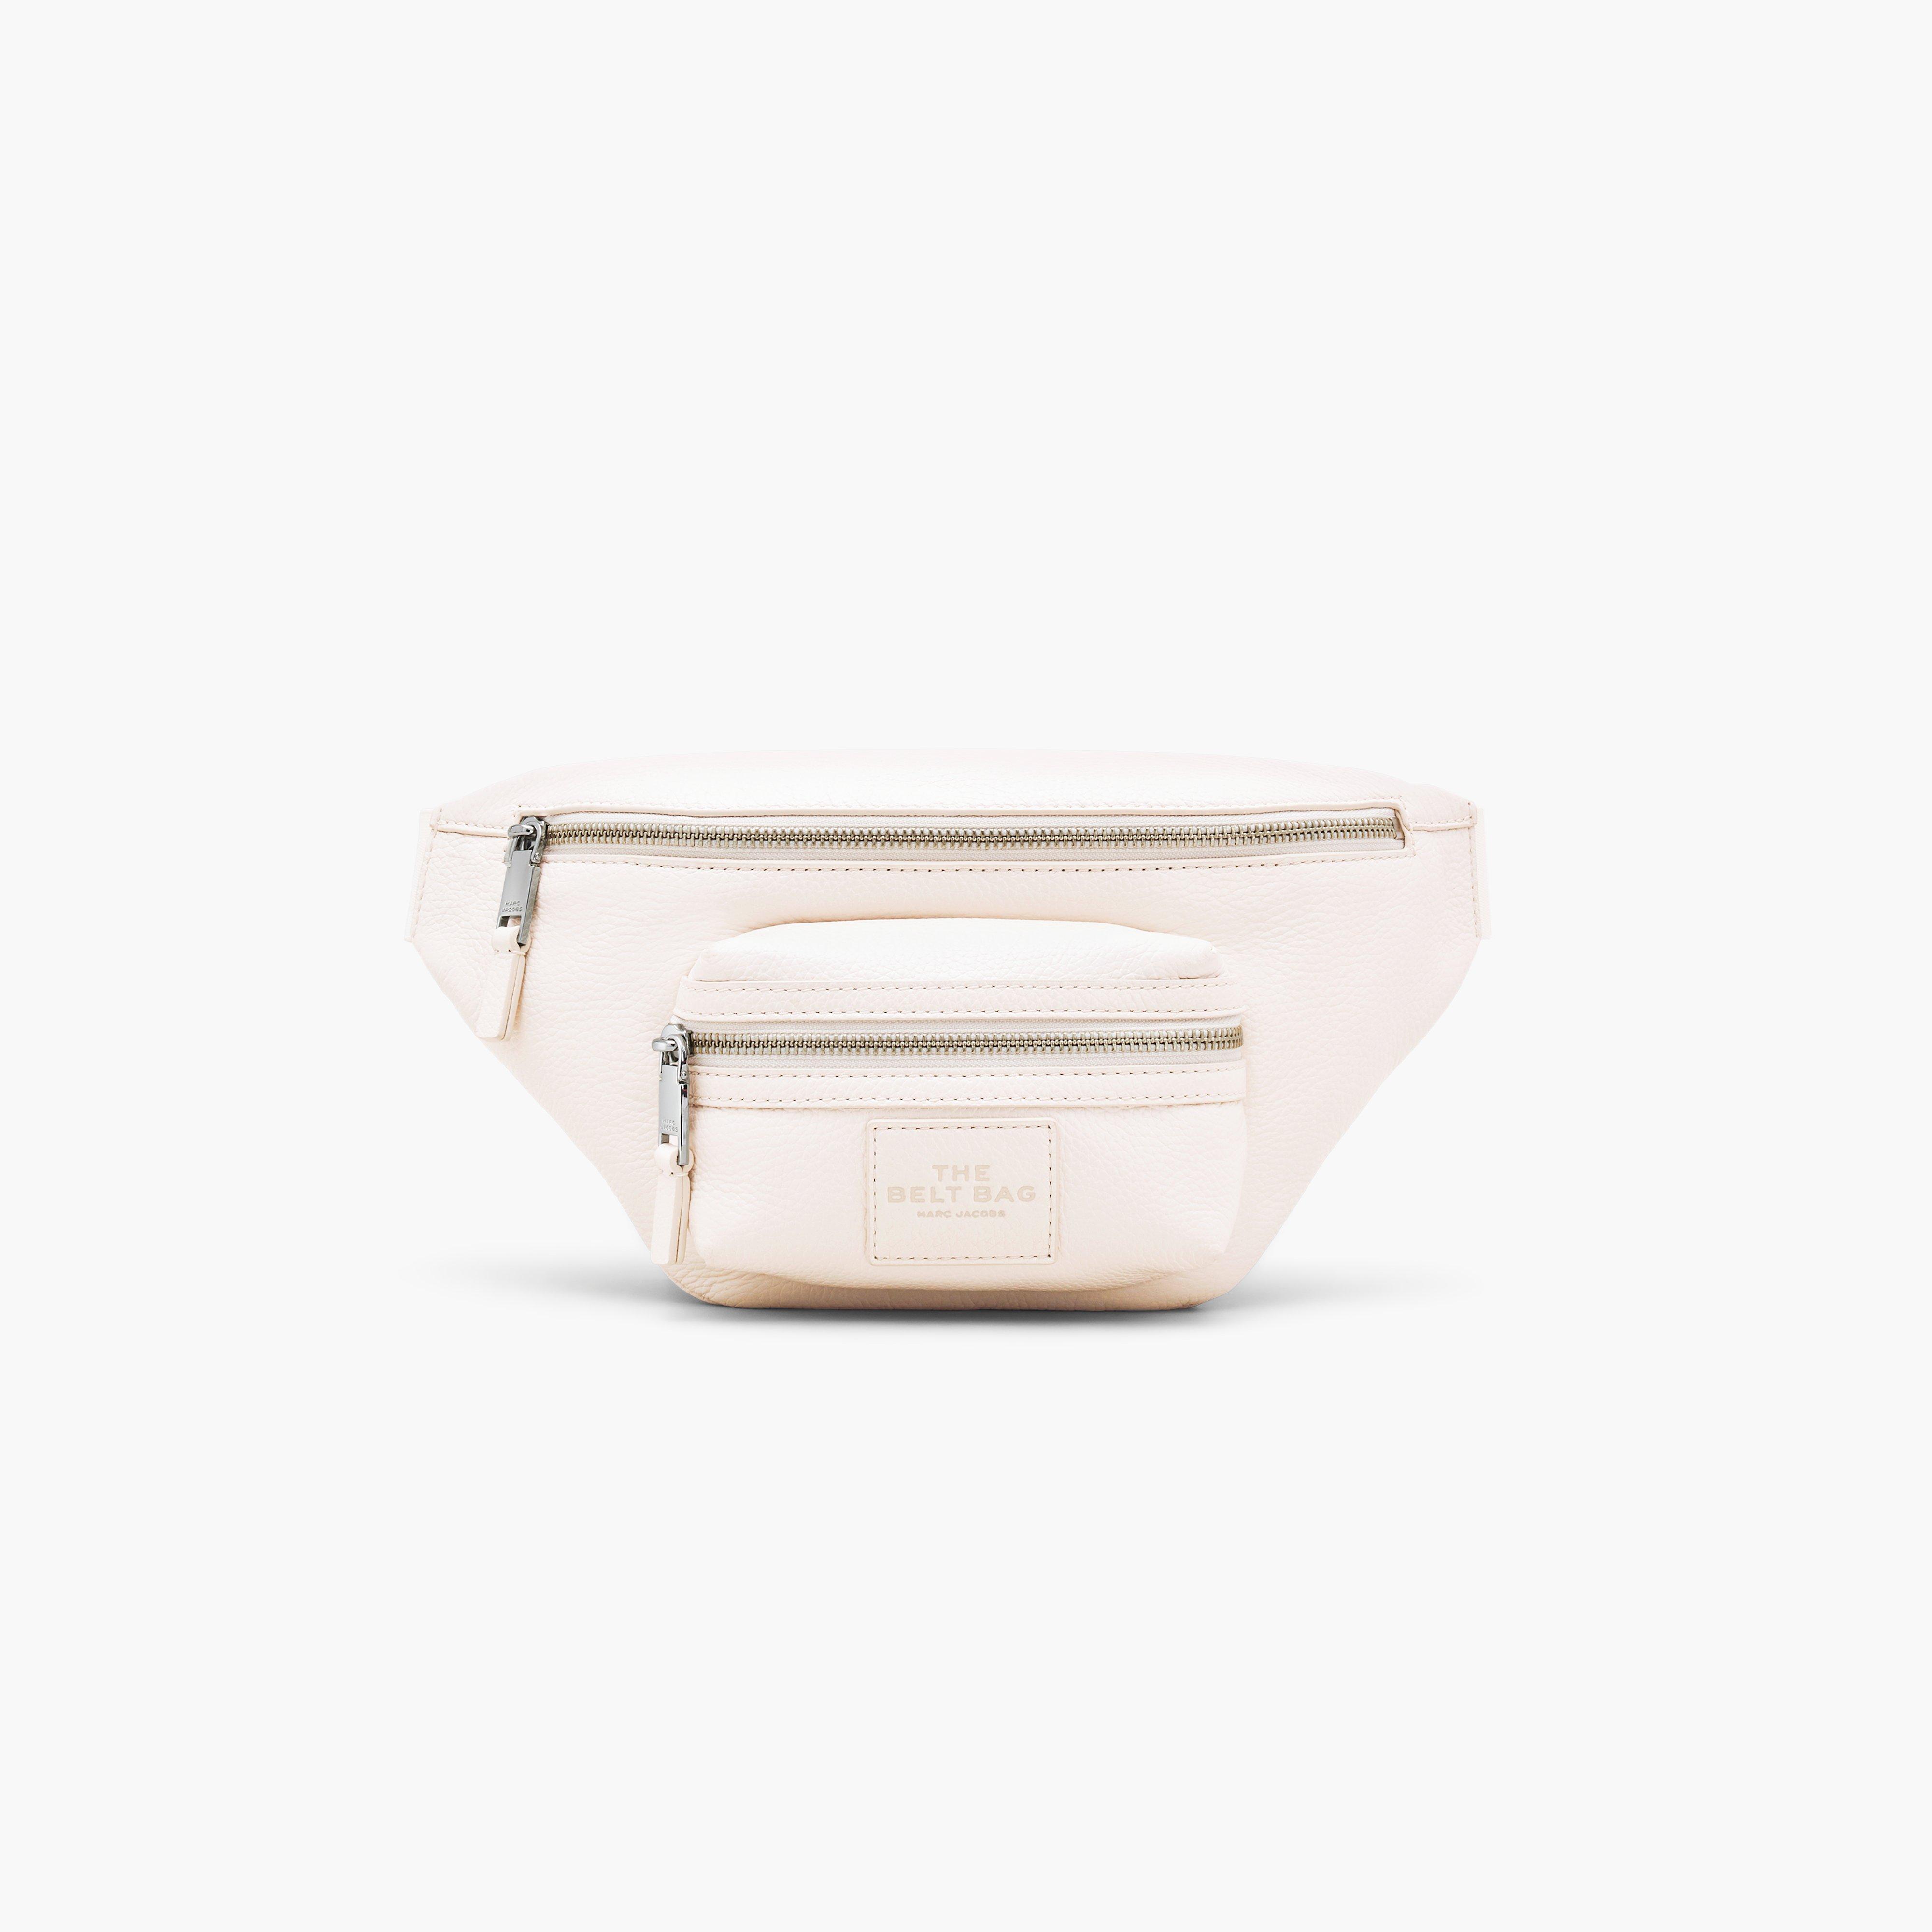 Marc by Marc jacobs The Leather Belt Bag,COTTON/SILVER